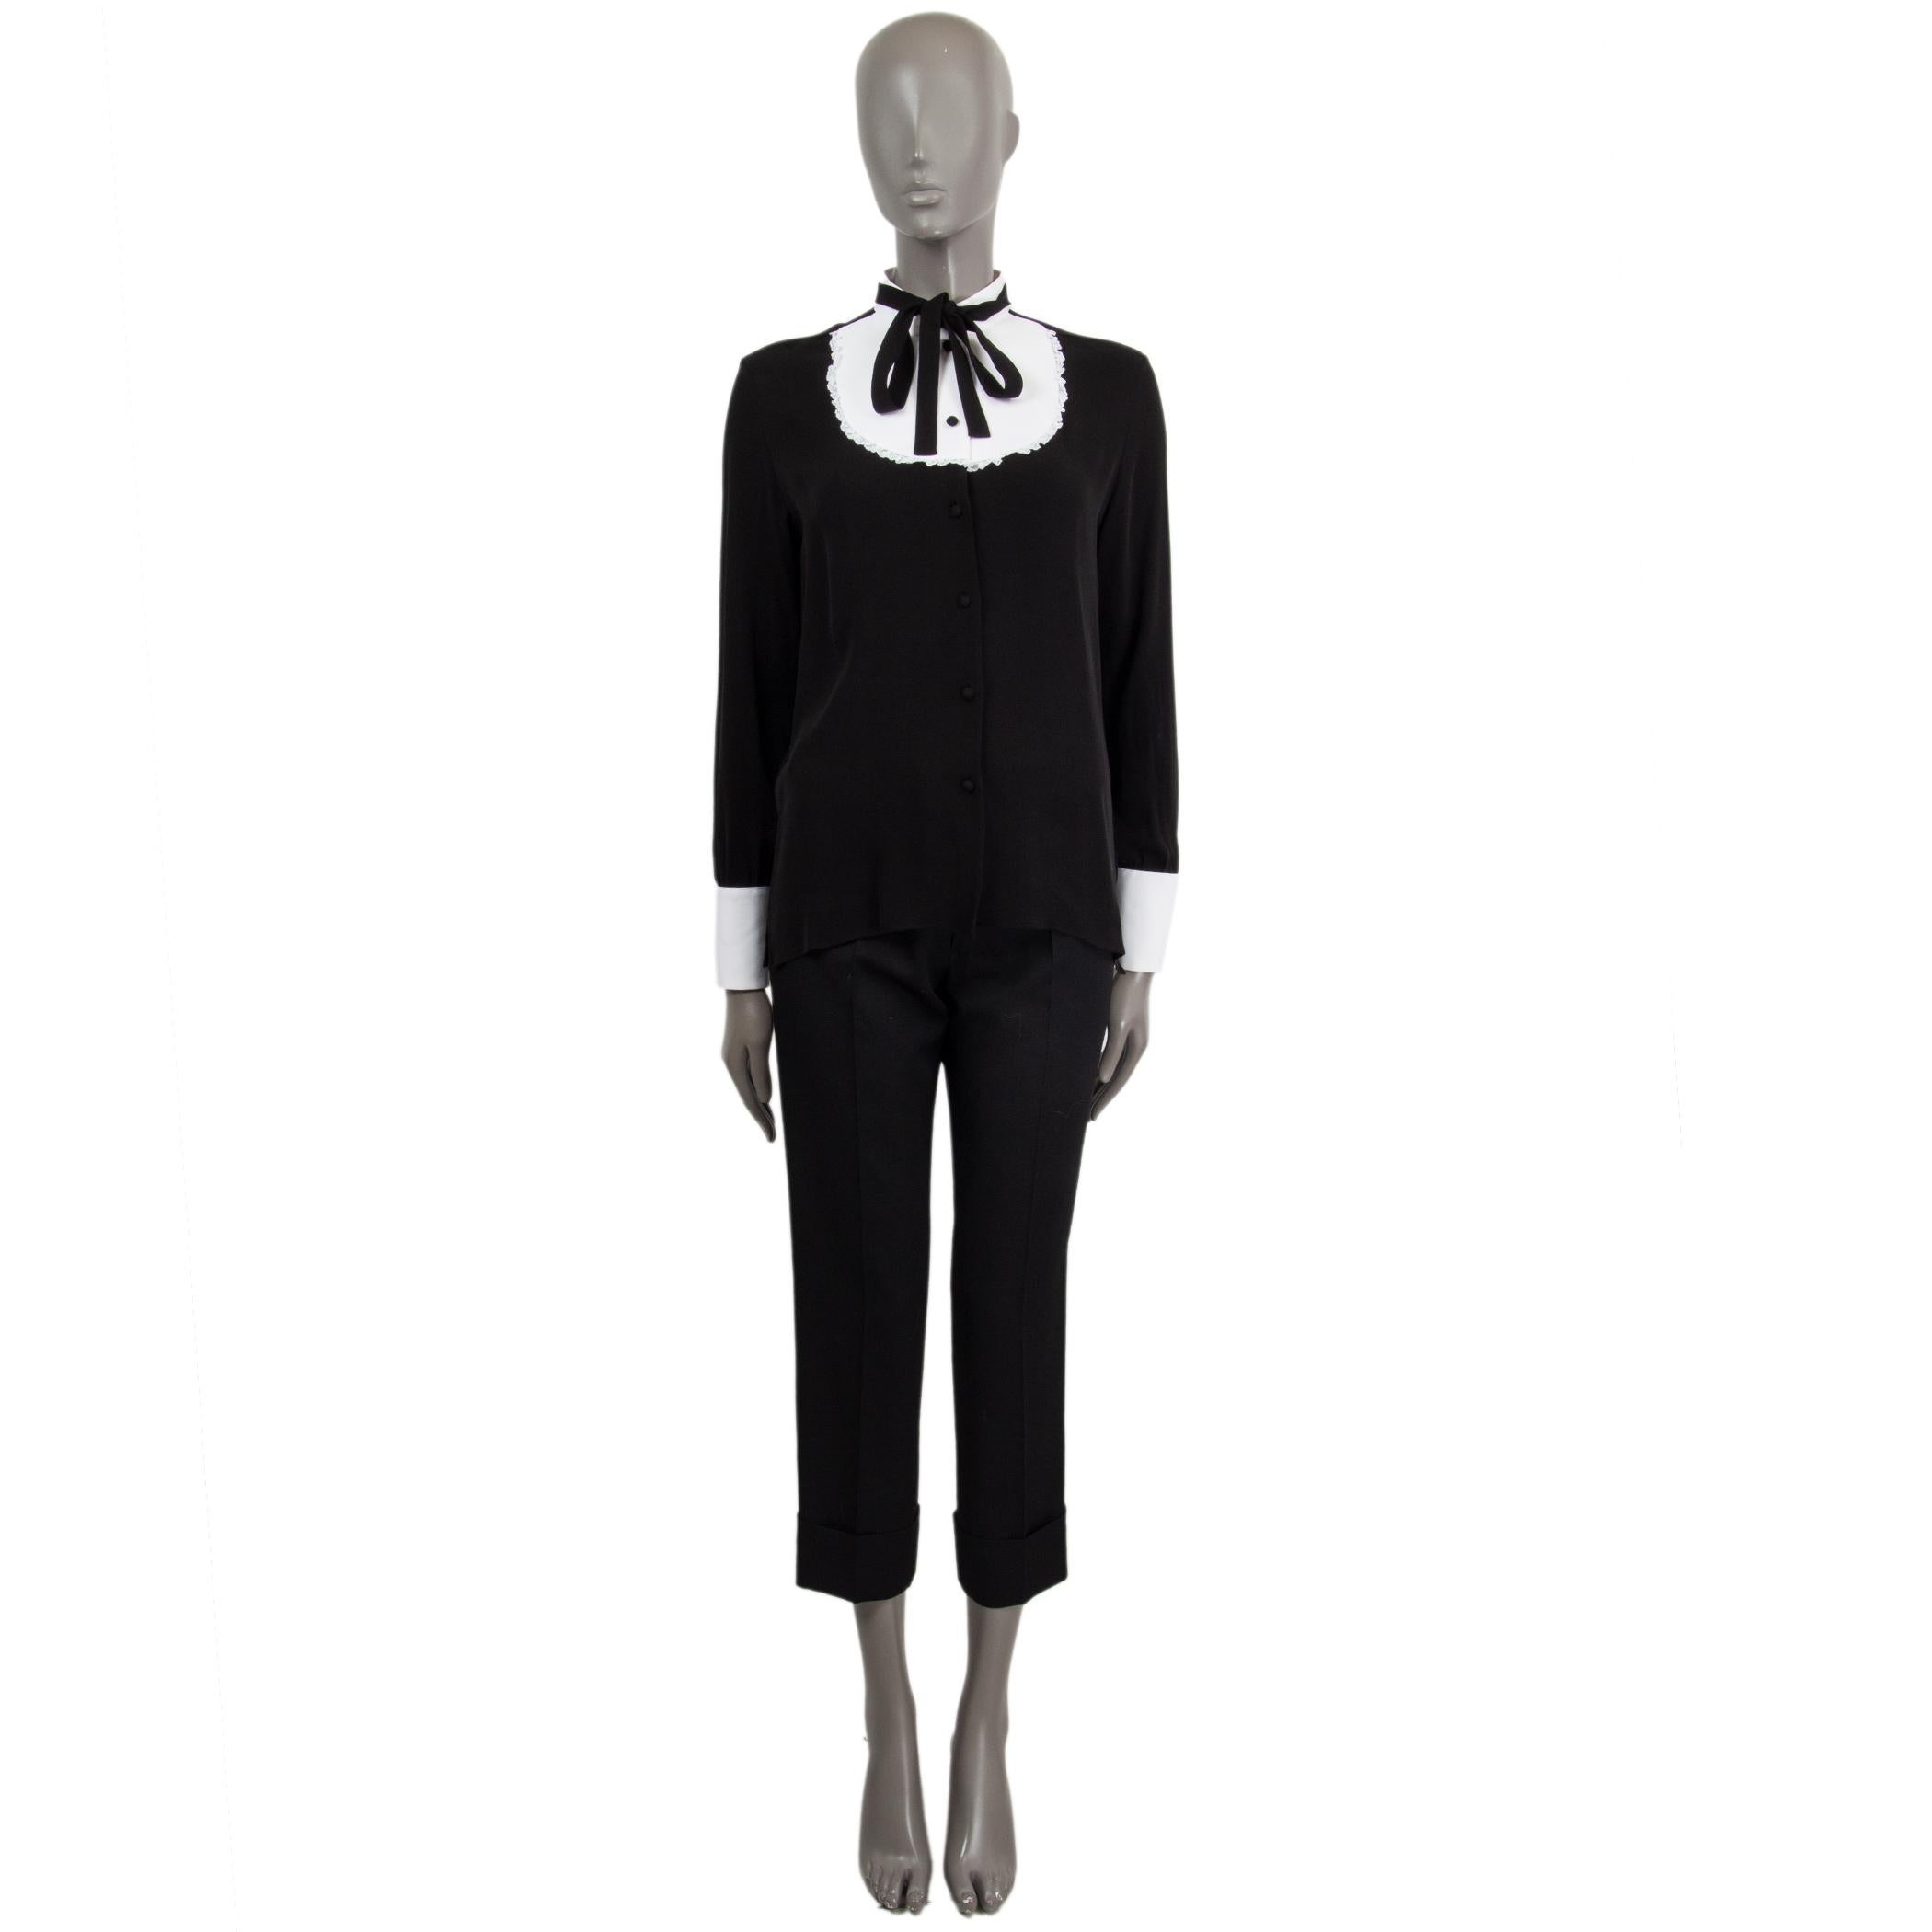 100% authentic Valentino long-sleeve plastron collar pussy bow blouse in black silk (100%) and collar and cuffs in white cotton (100%). Opens with covered buttons and is unlined. Has been worn and is in excellent condition. 

Measurements
Tag